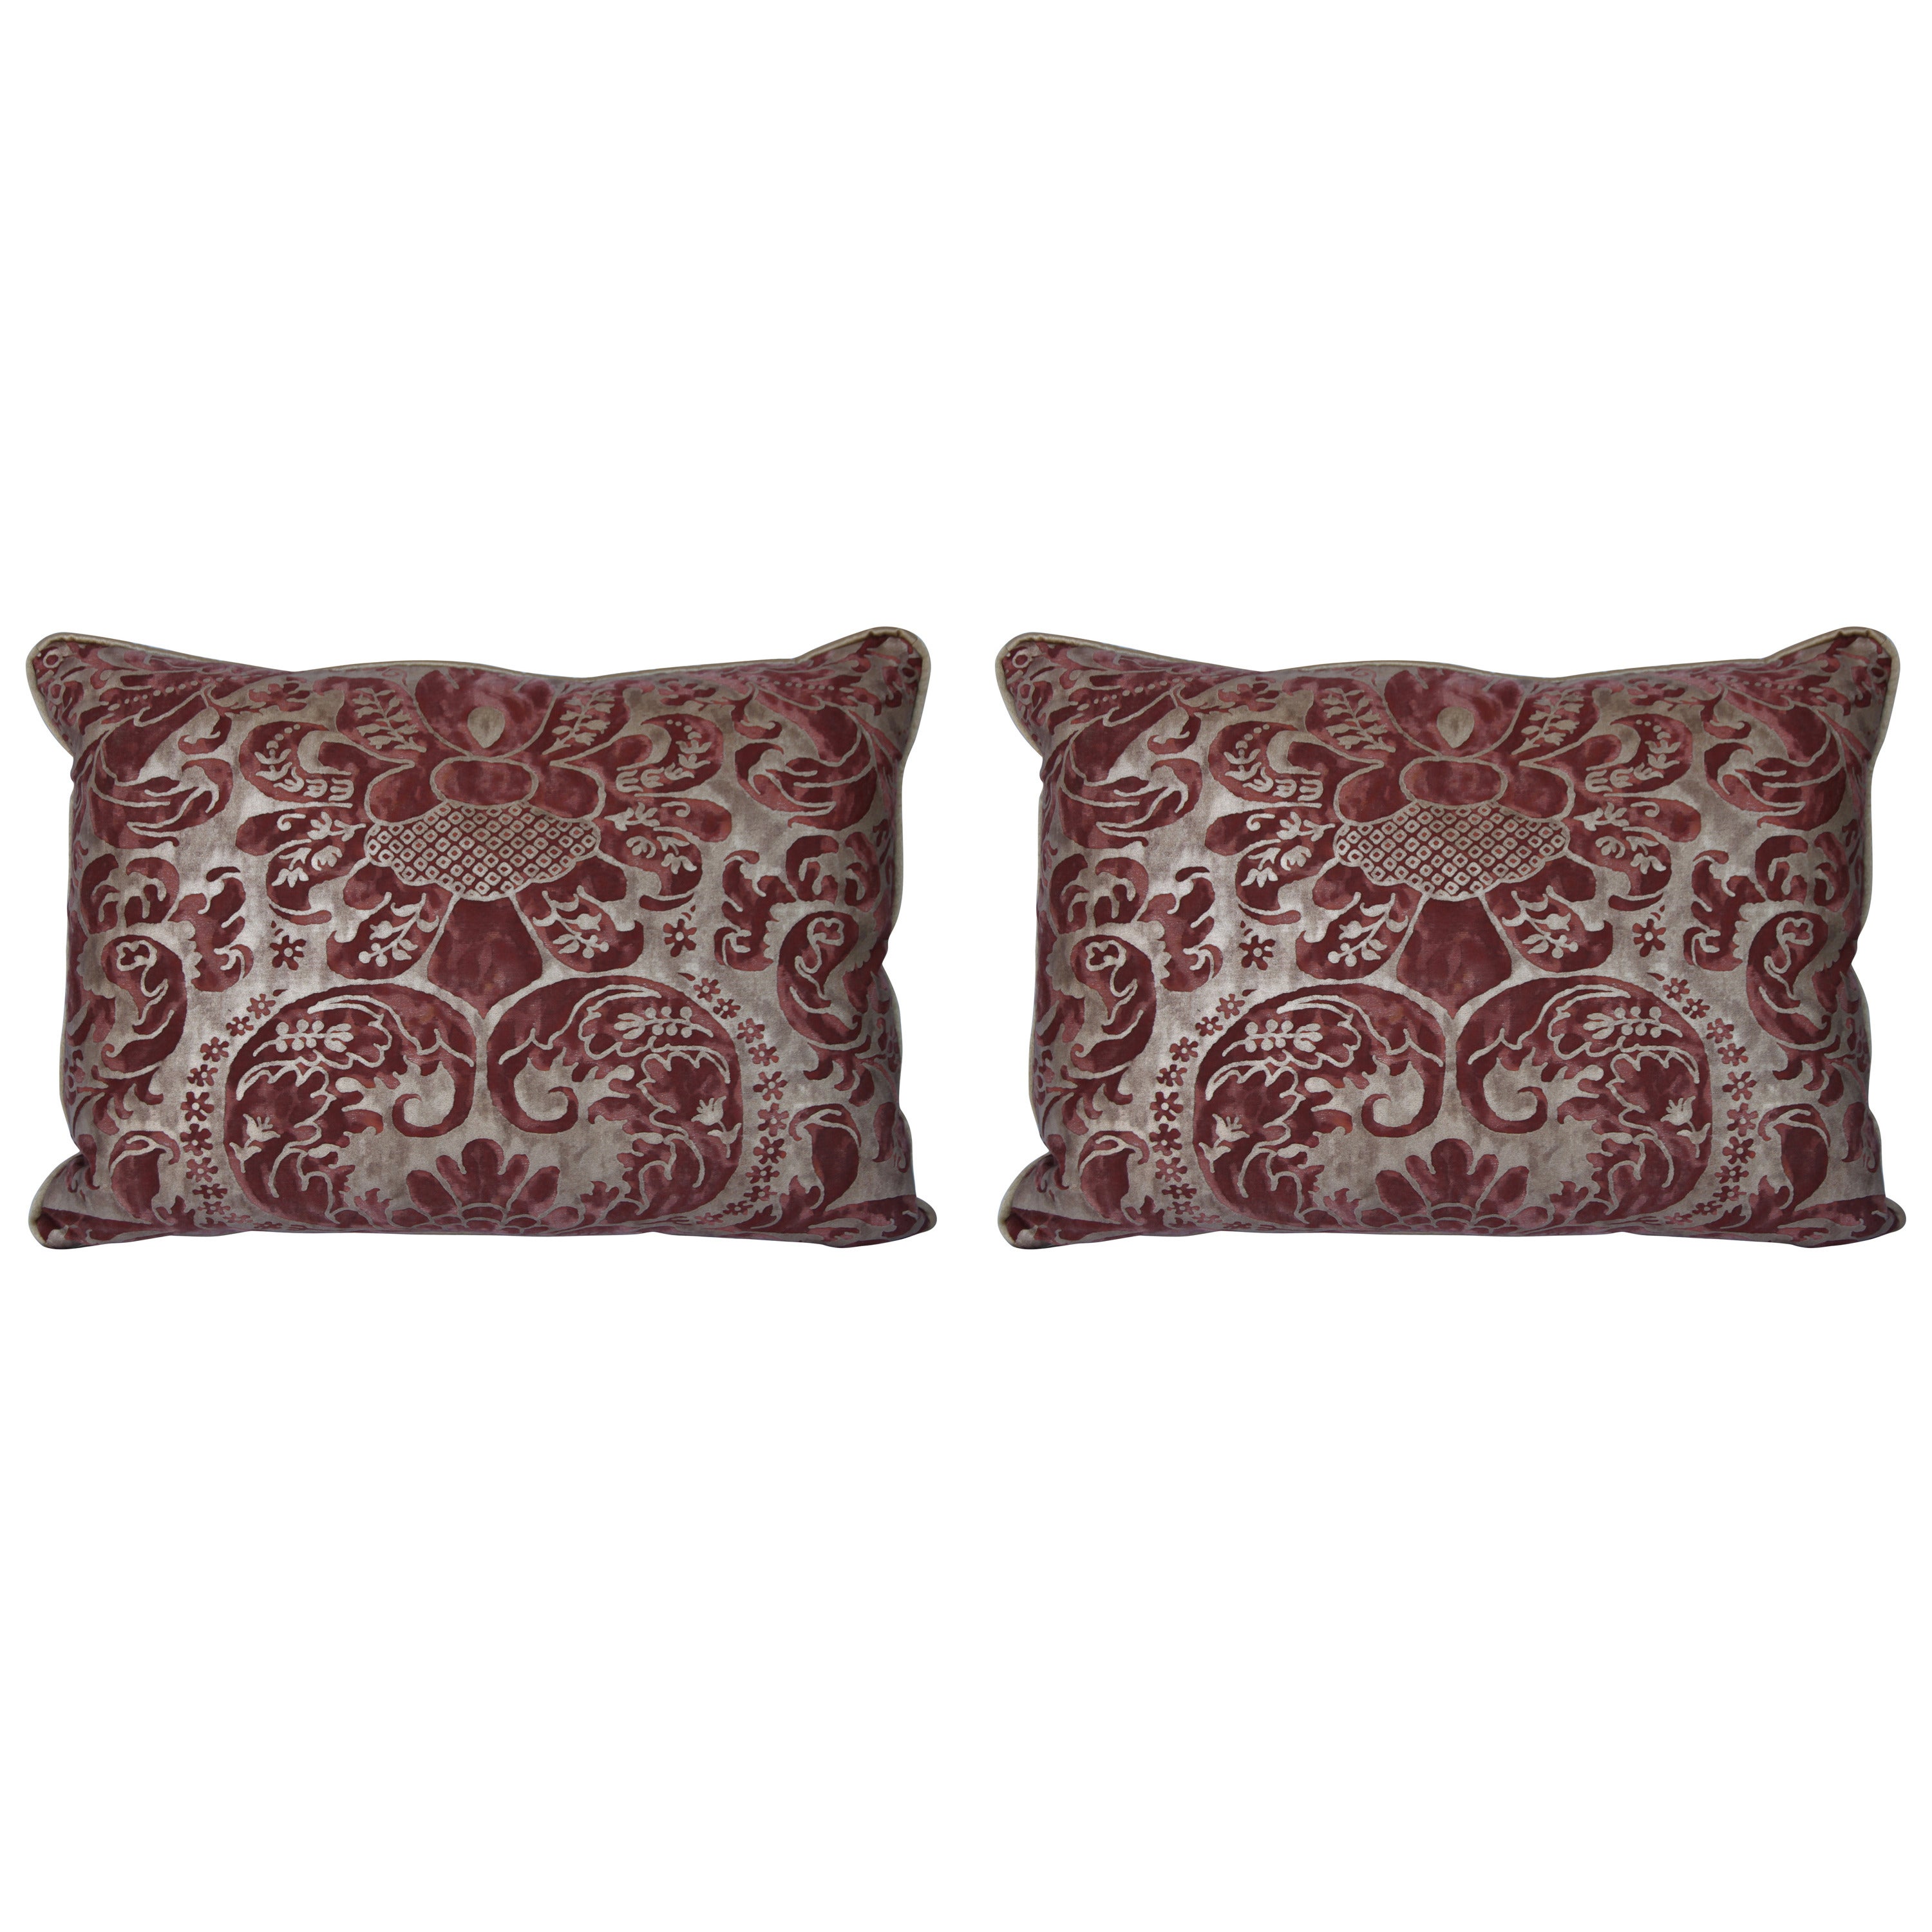 Pair of Caravaggio Fortuny Pillows